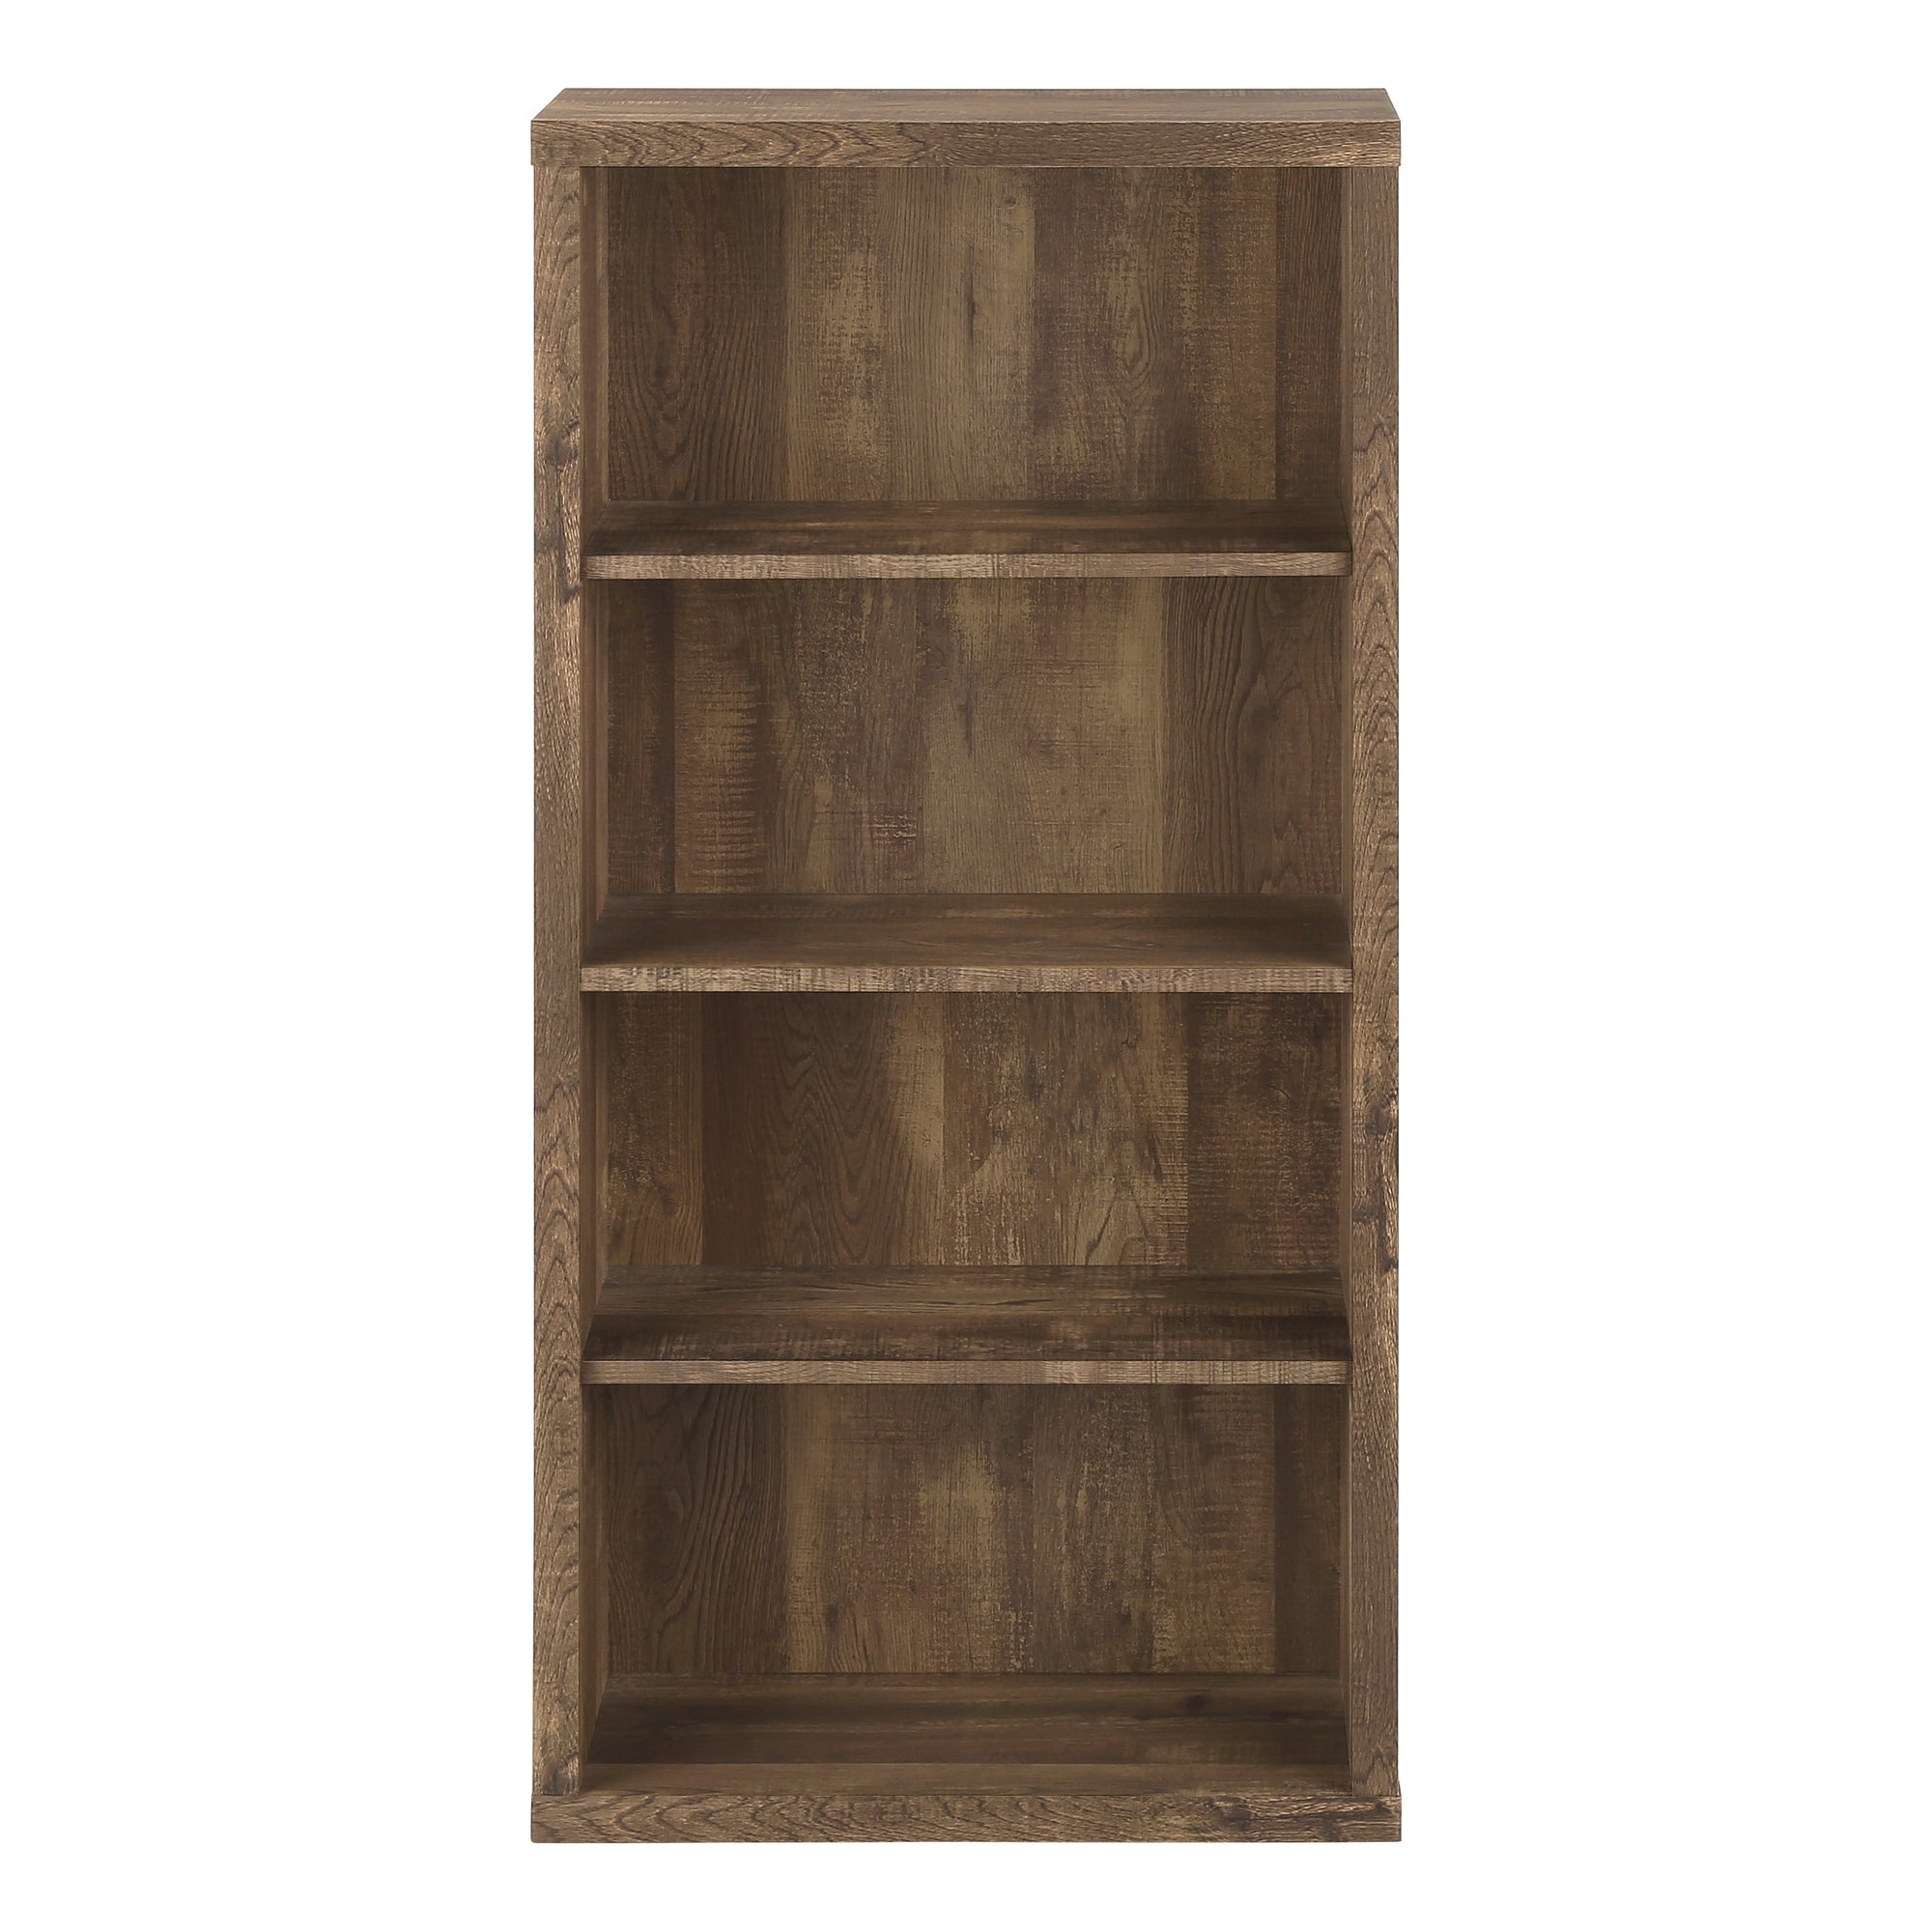 MN-707404    Bookshelf, Bookcase, Etagere, 5 Tier, Office, Bedroom, 48"H, Laminate, Brown Reclaimed Wood Look, Contemporary, Modern